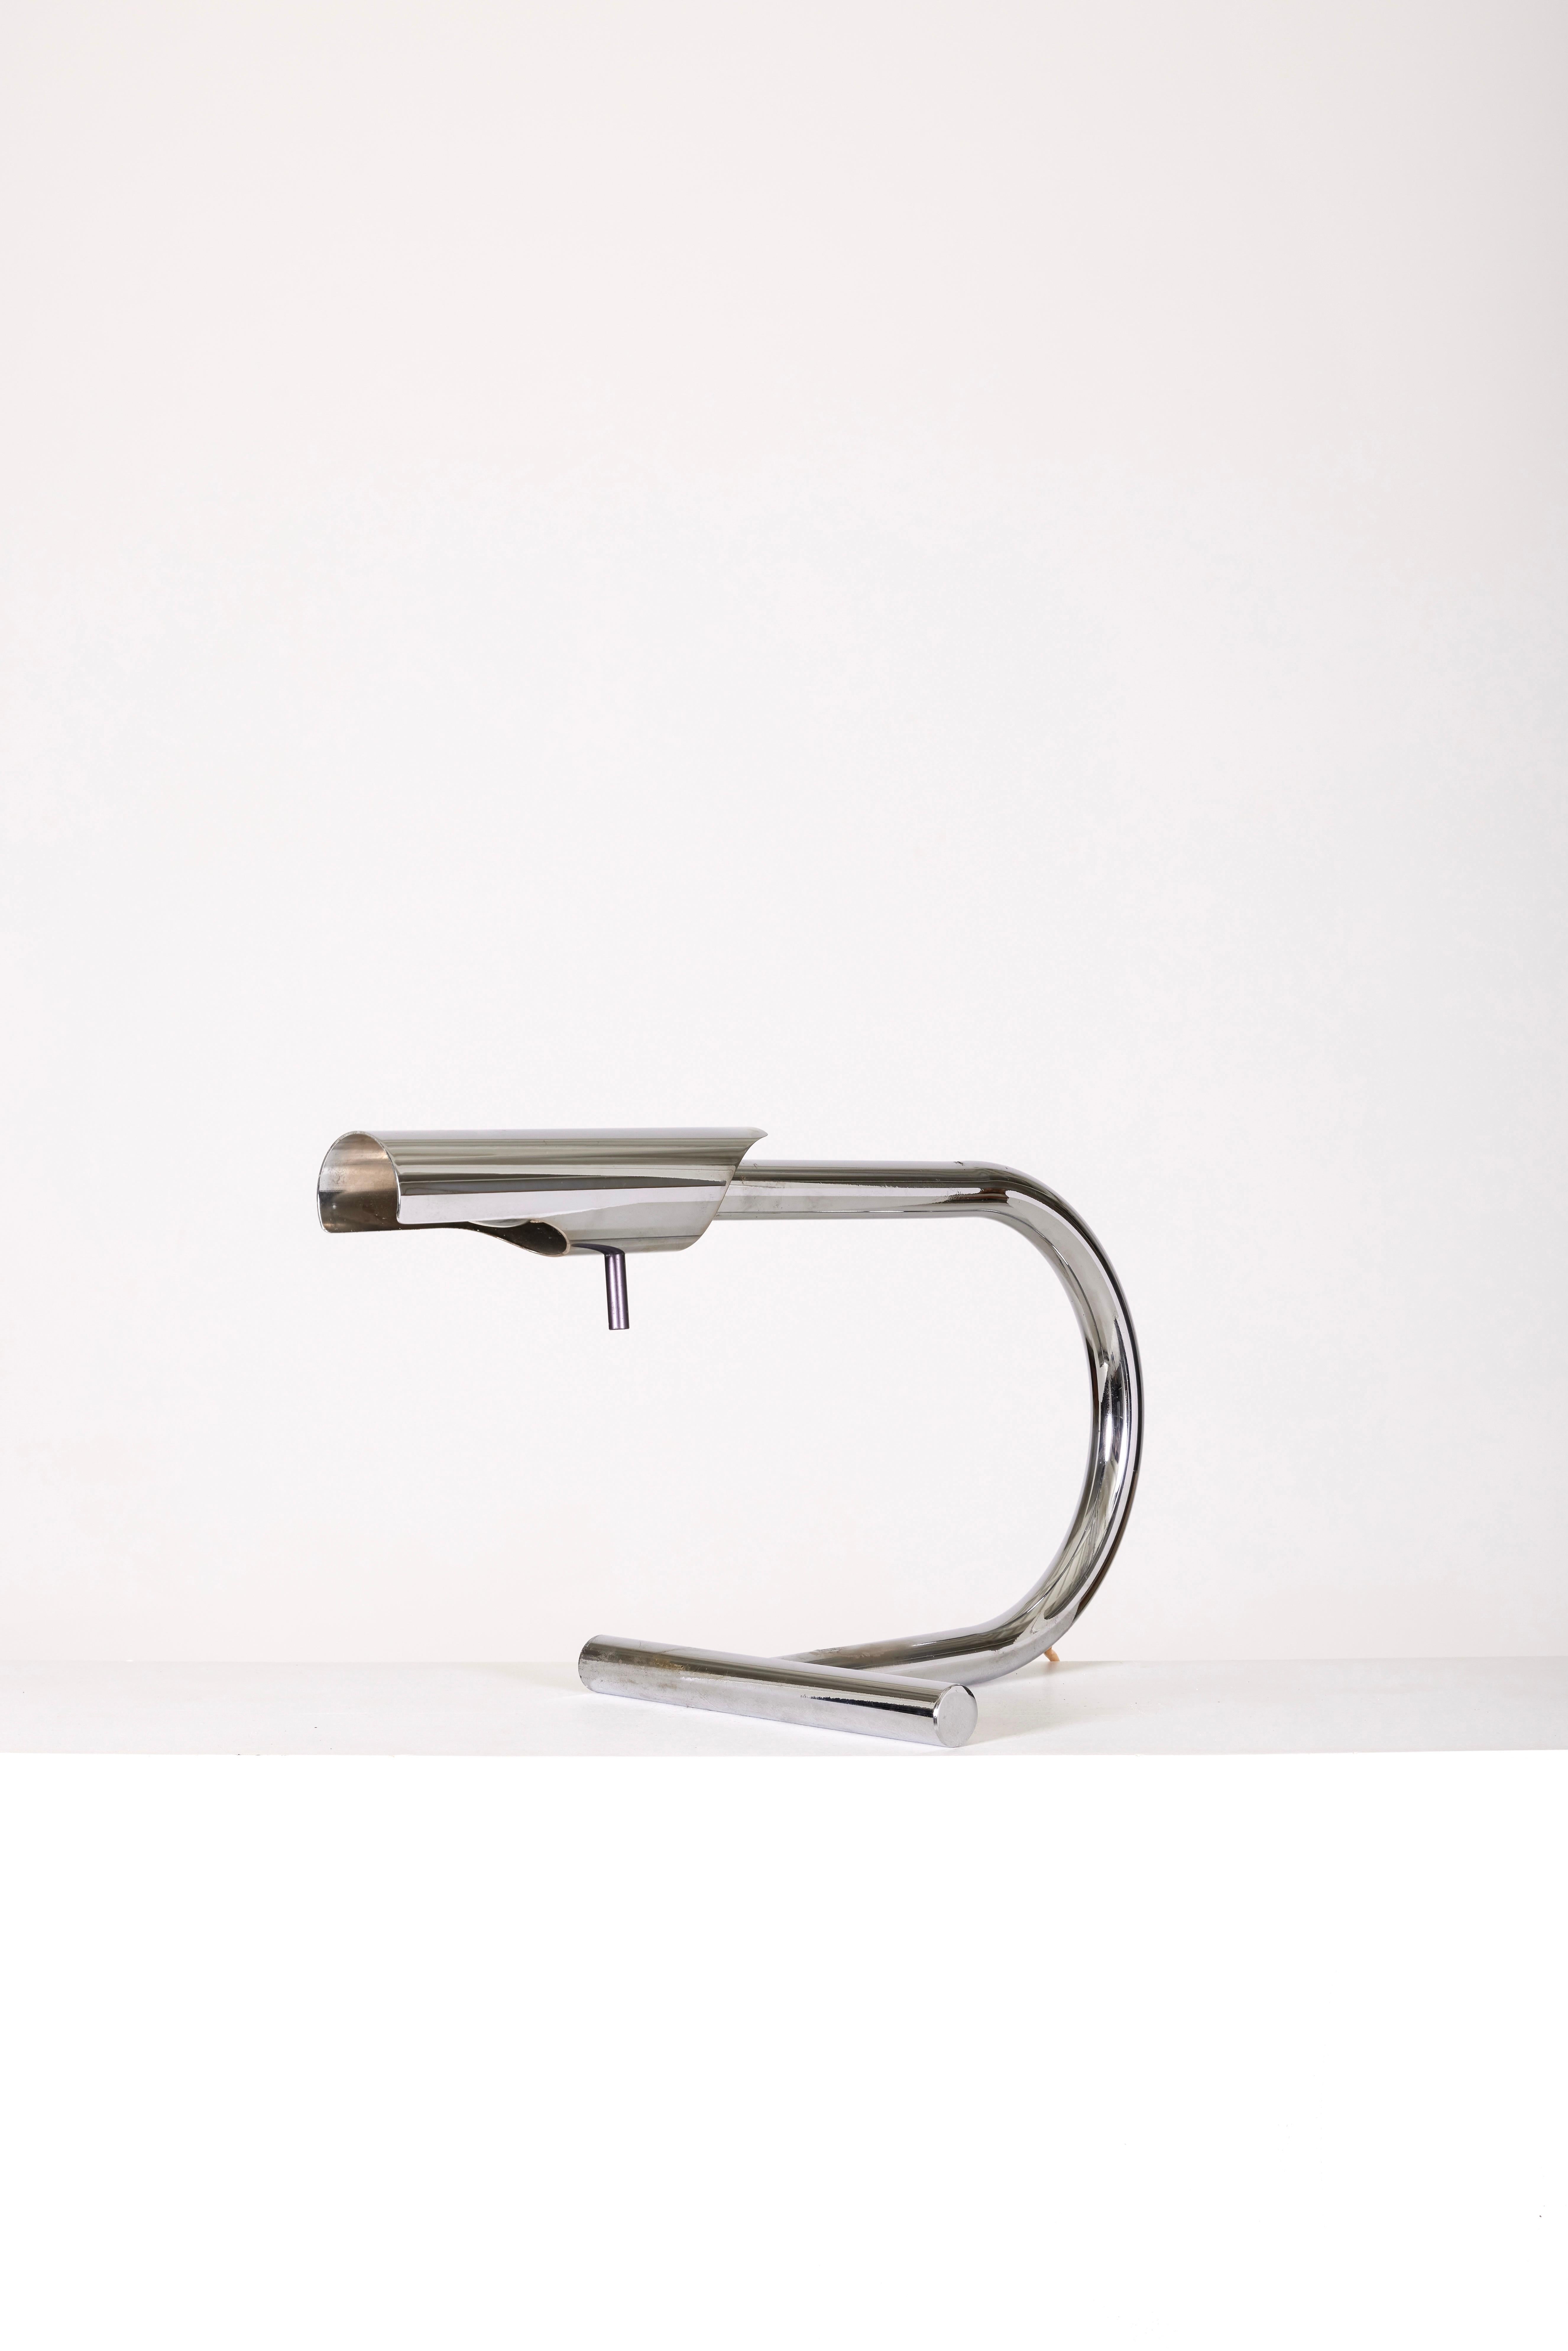 Chrome-plated metal desk lamp by designer Etienne Fermigier for Disderot, 1970s. Visible signs of wear, as shown in the photos, to be noted.
LP1268